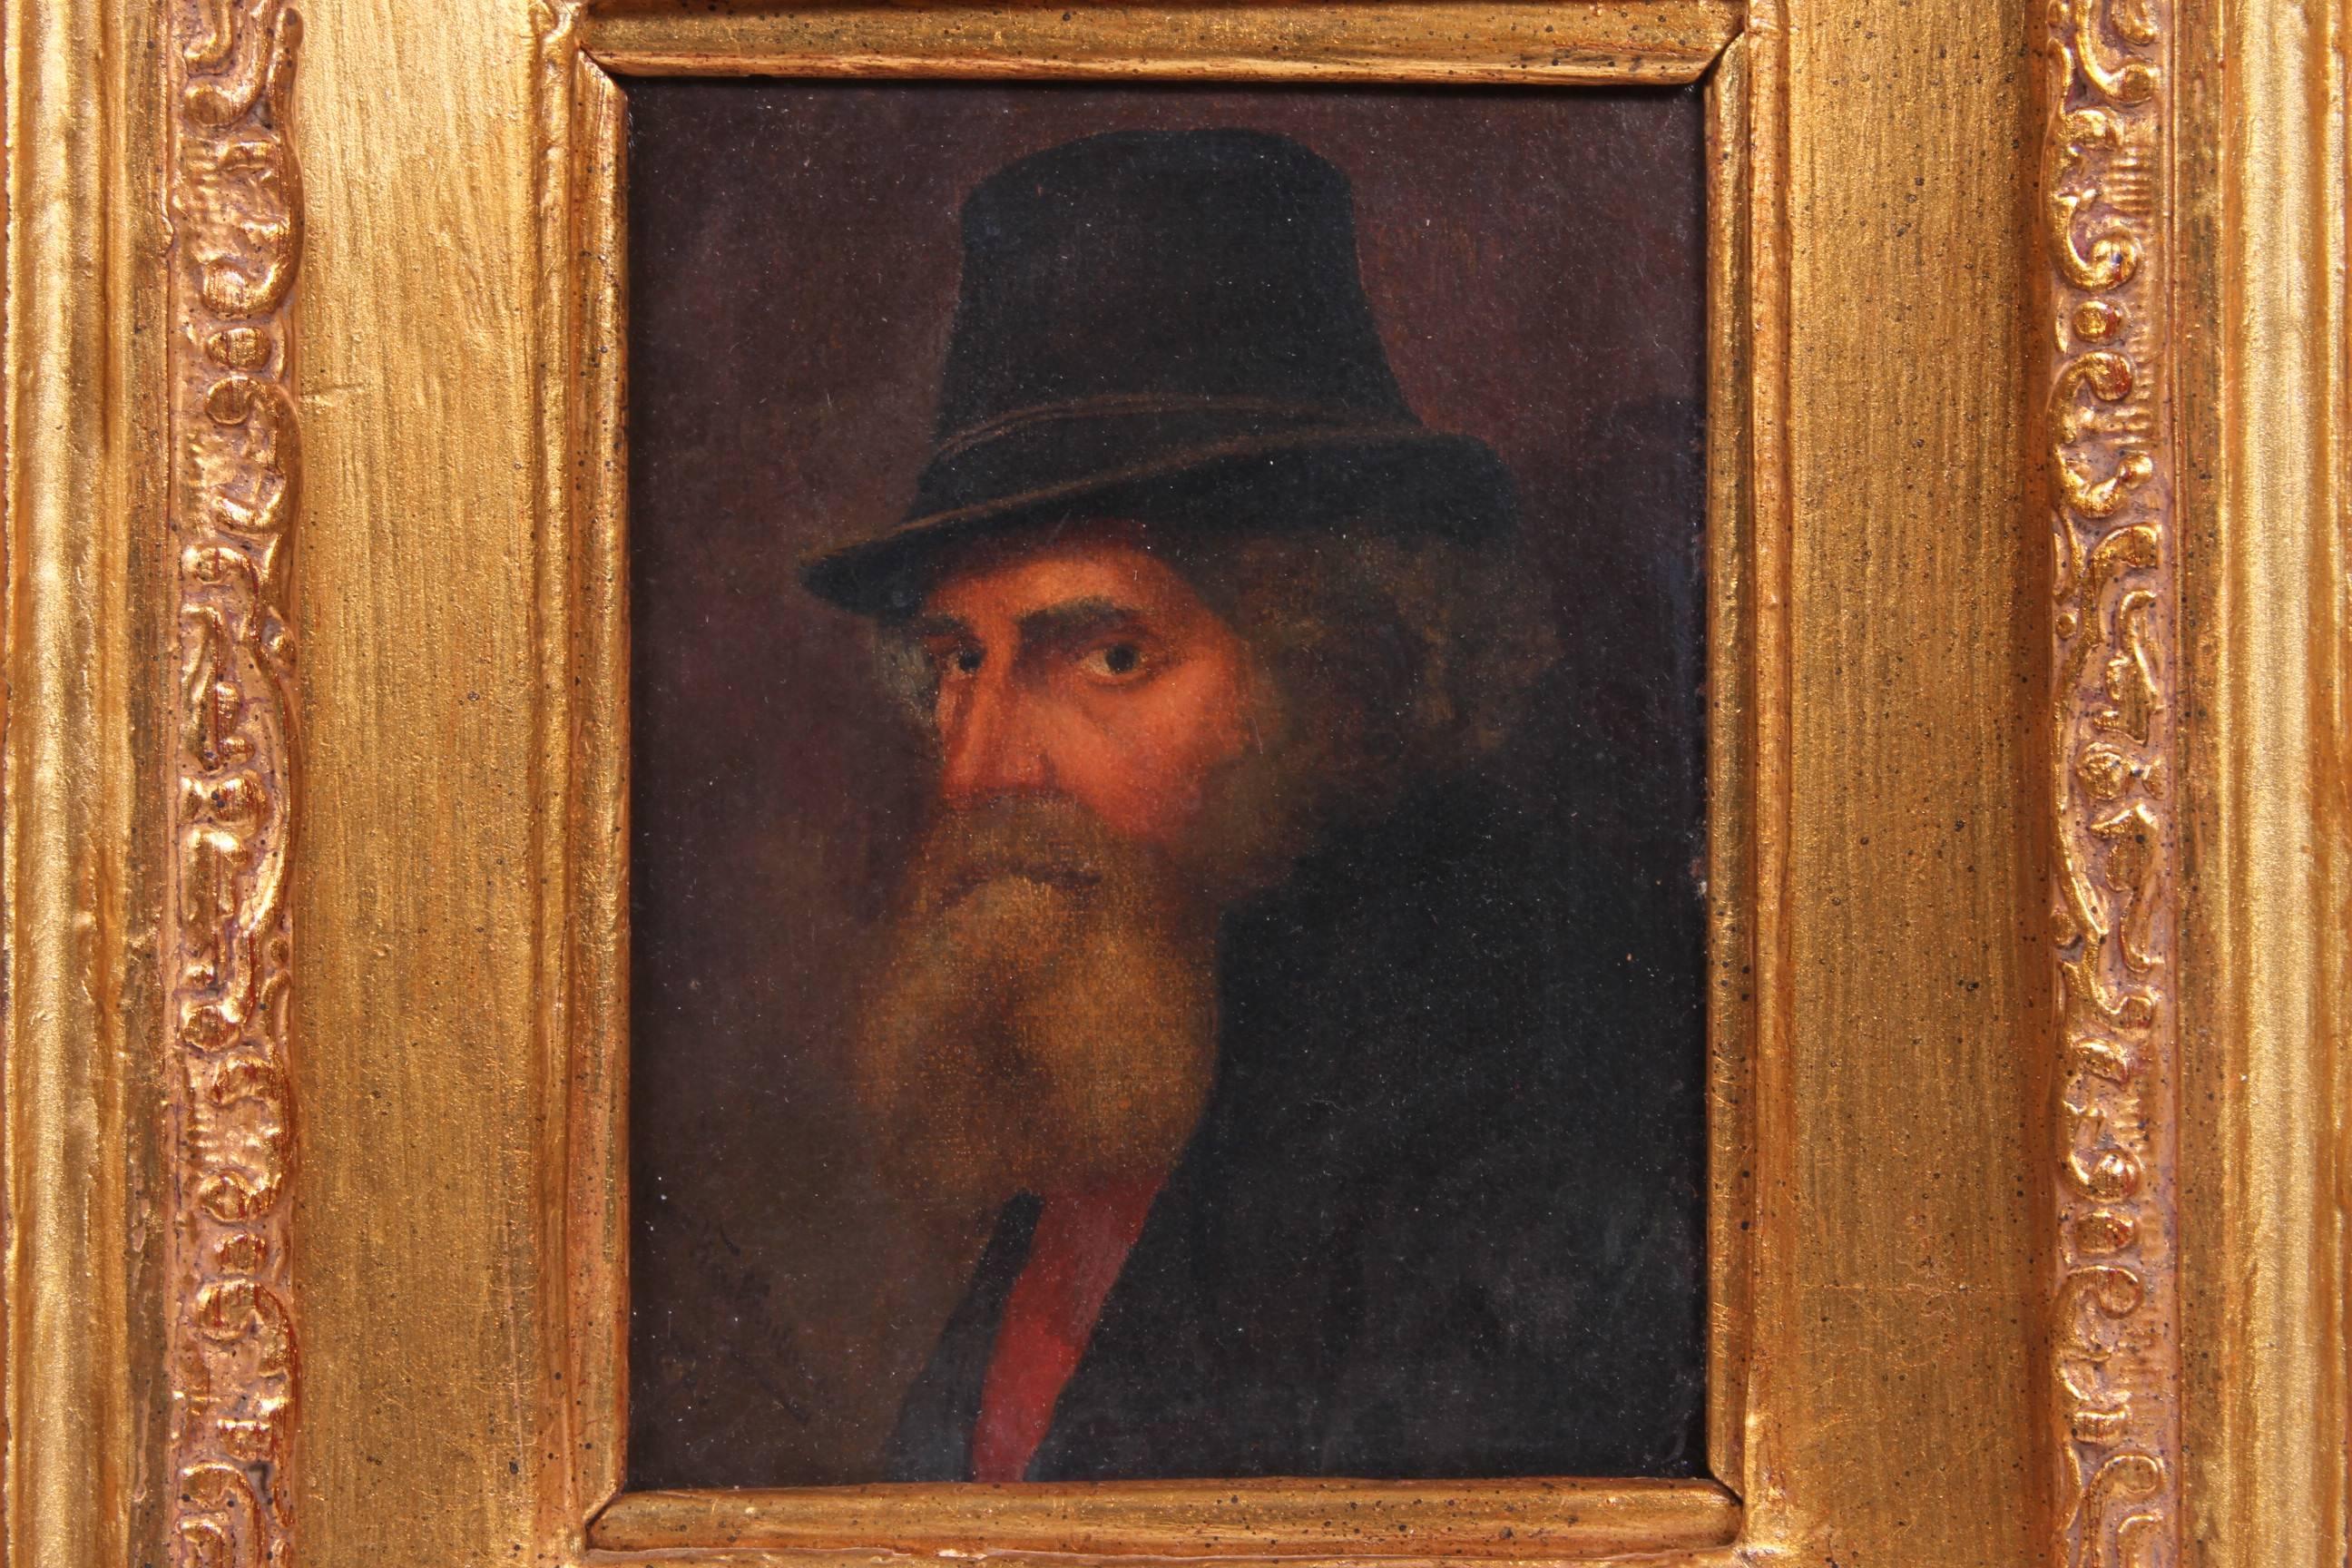 Oil on panel depicting a bearded gentleman in top hat. Signed lower left. Ornate wood and gesso gilded frame. Overall dimensions given below, the image size is 5.75 inches high X 4.5 inches; wide.